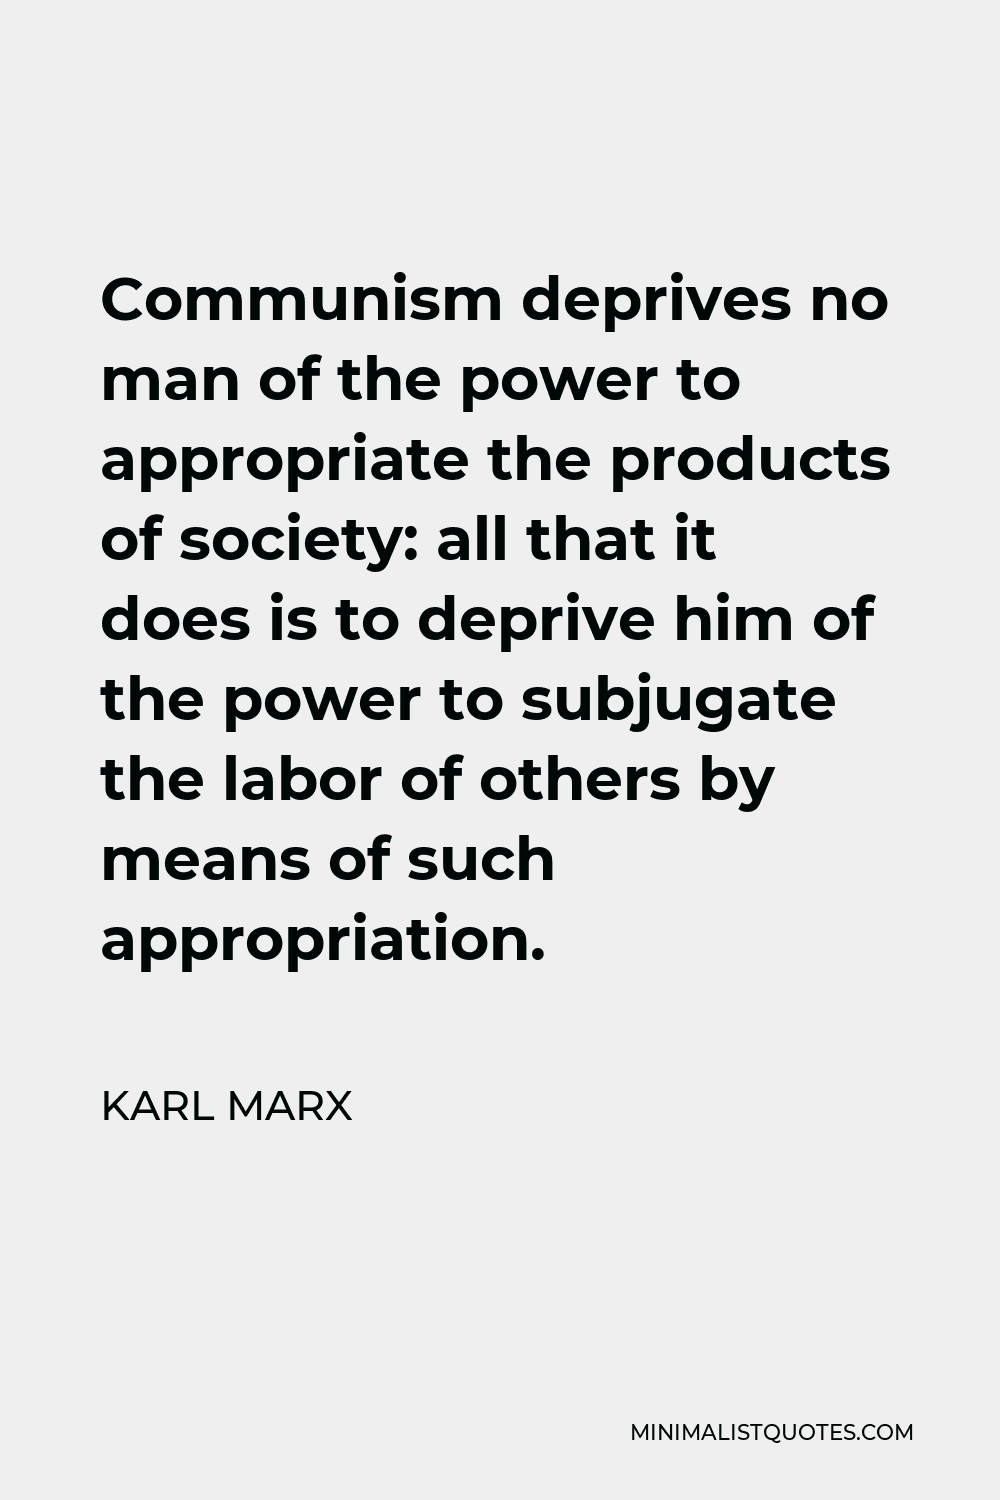 Karl Marx Quote - Communism deprives no man of the power to appropriate the products of society: all that it does is to deprive him of the power to subjugate the labor of others by means of such appropriation.